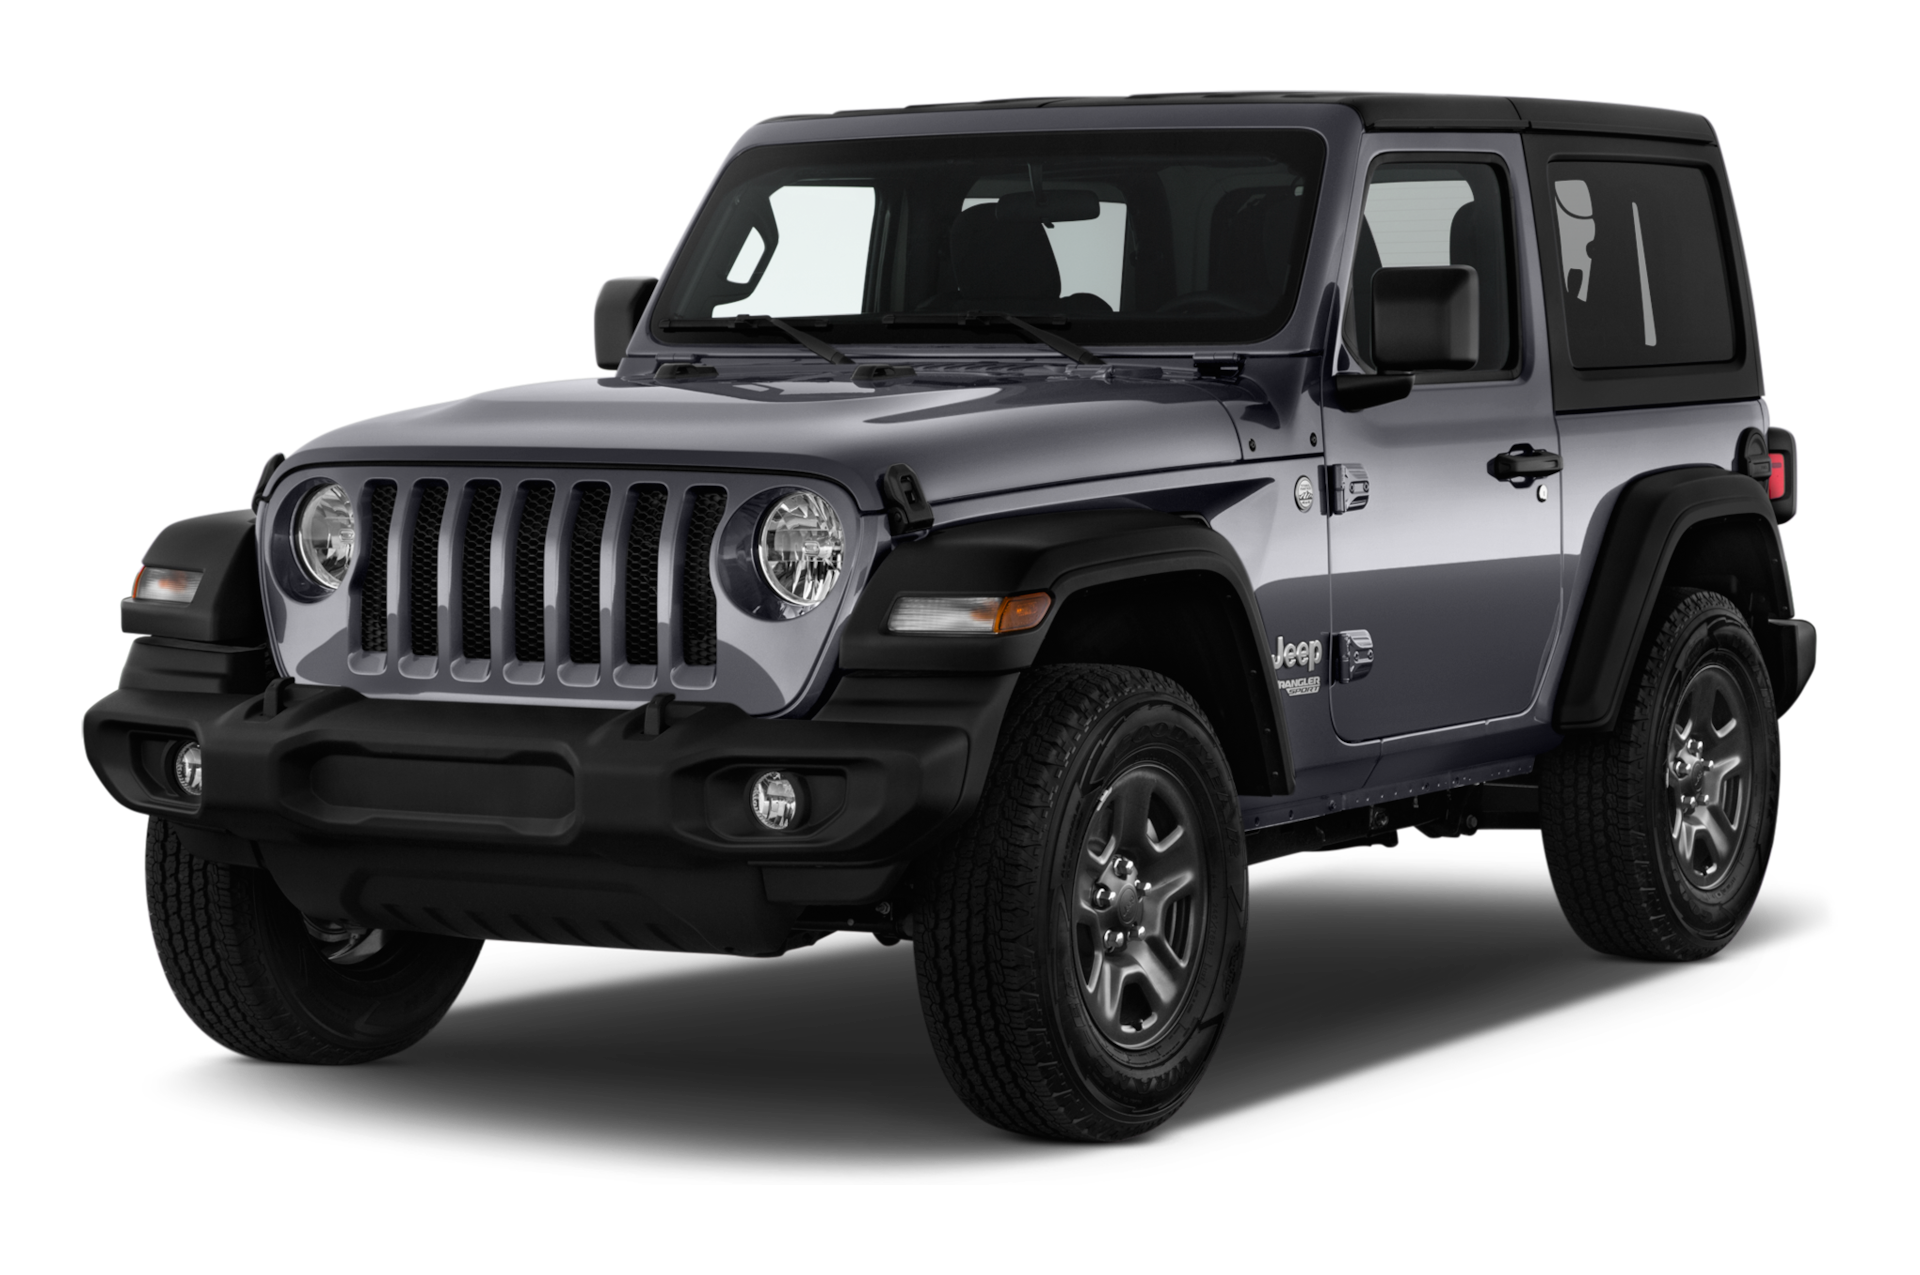 2019 Jeep Wrangler Prices, Reviews, and Photos - MotorTrend